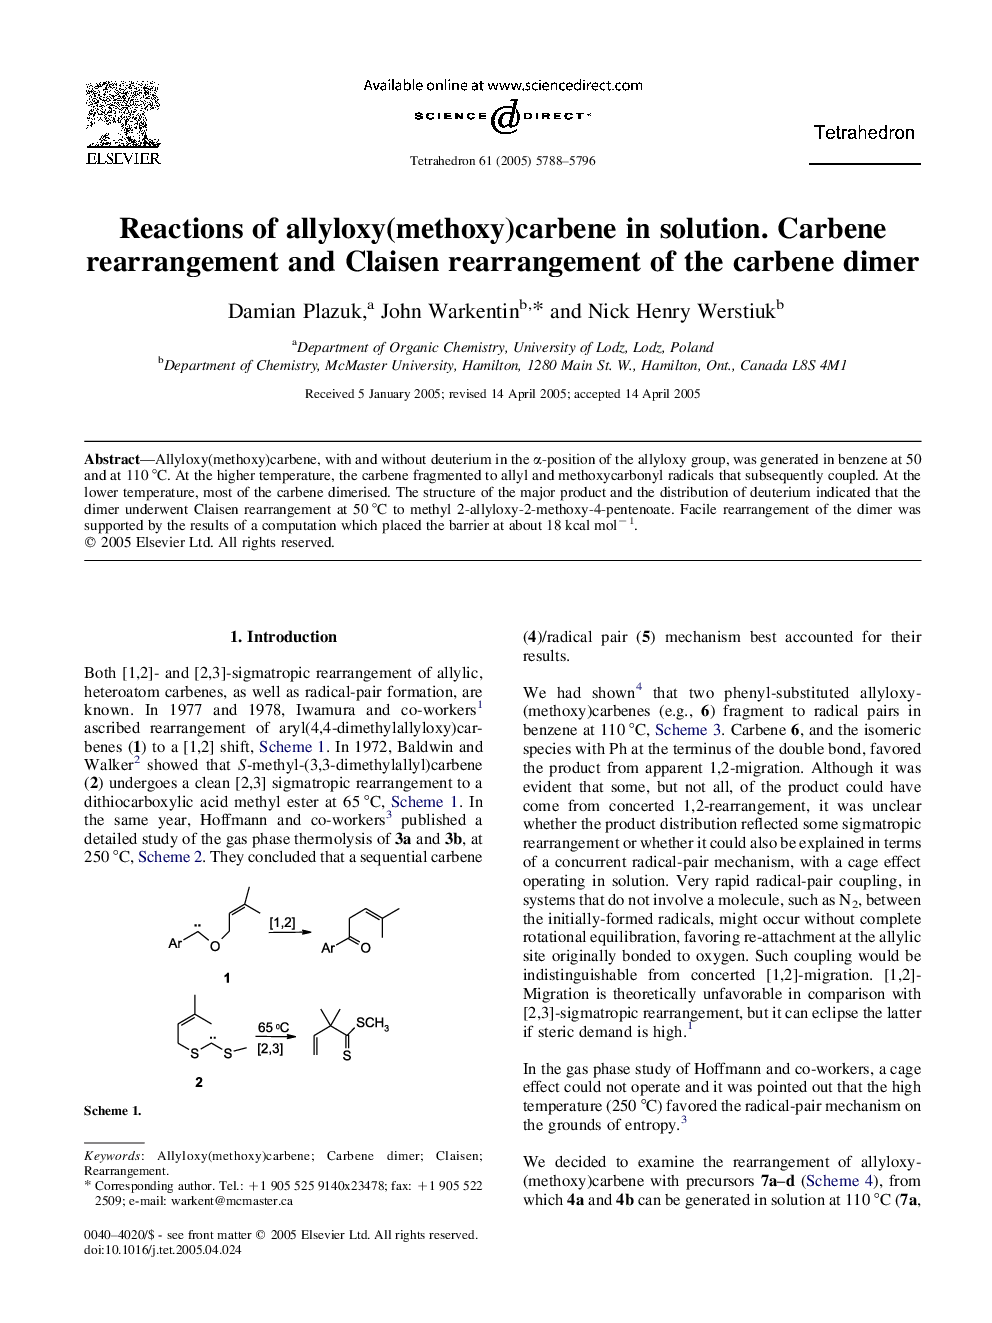 Reactions of allyloxy(methoxy)carbene in solution. Carbene rearrangement and Claisen rearrangement of the carbene dimer